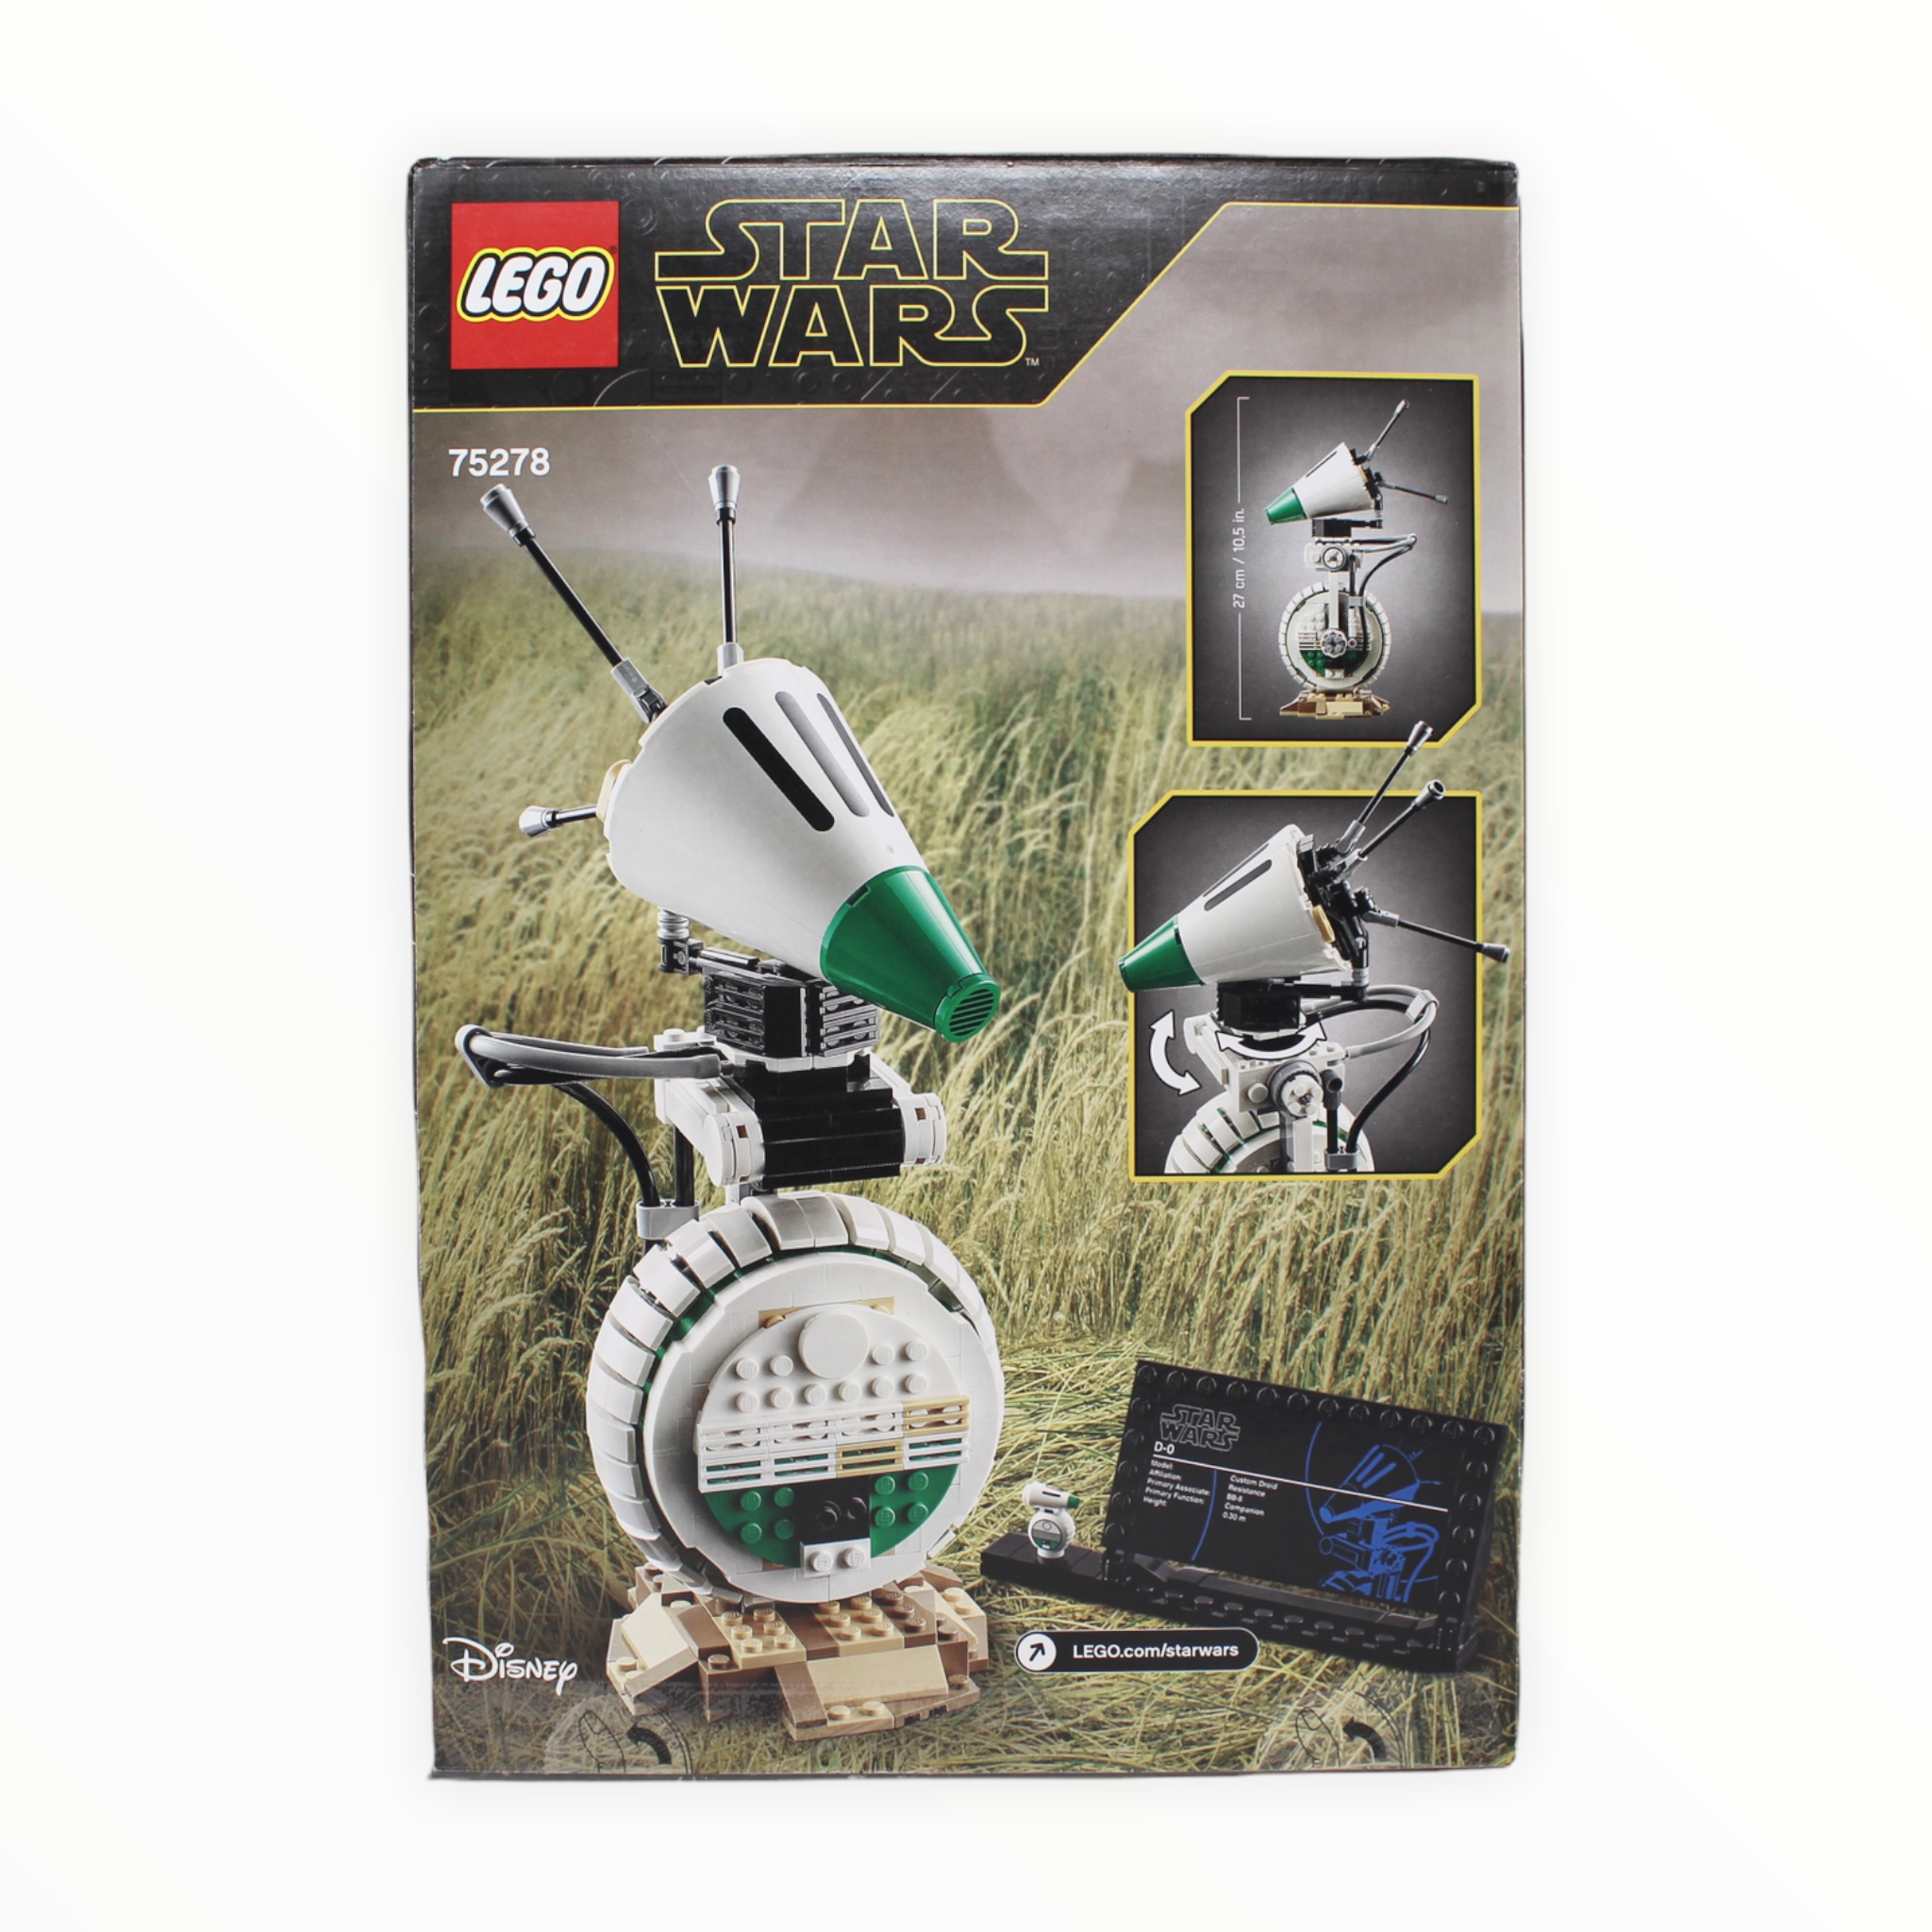 Certified Used 75278 Star Wars D-O